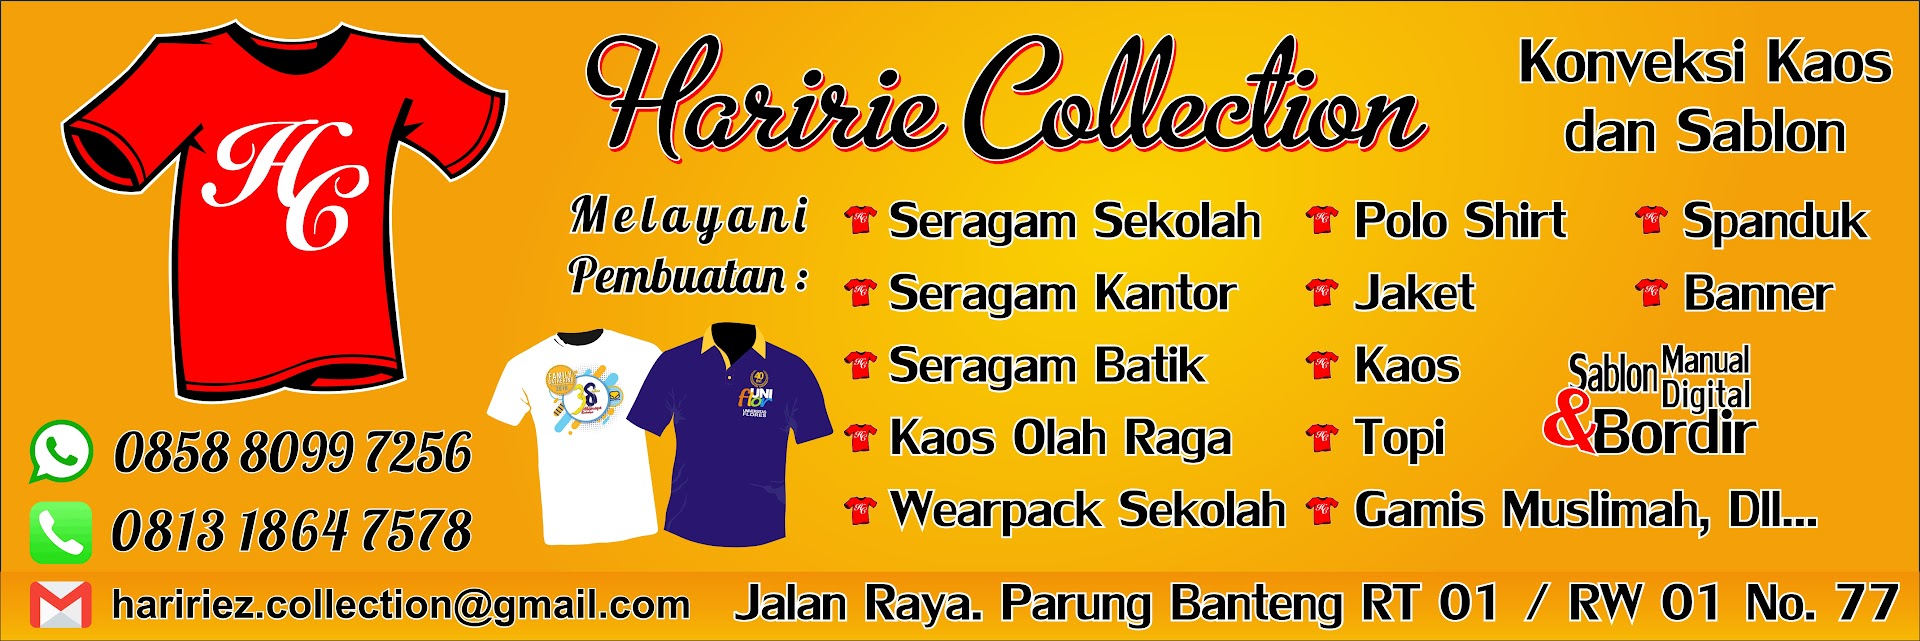 Haririe Collection Photo